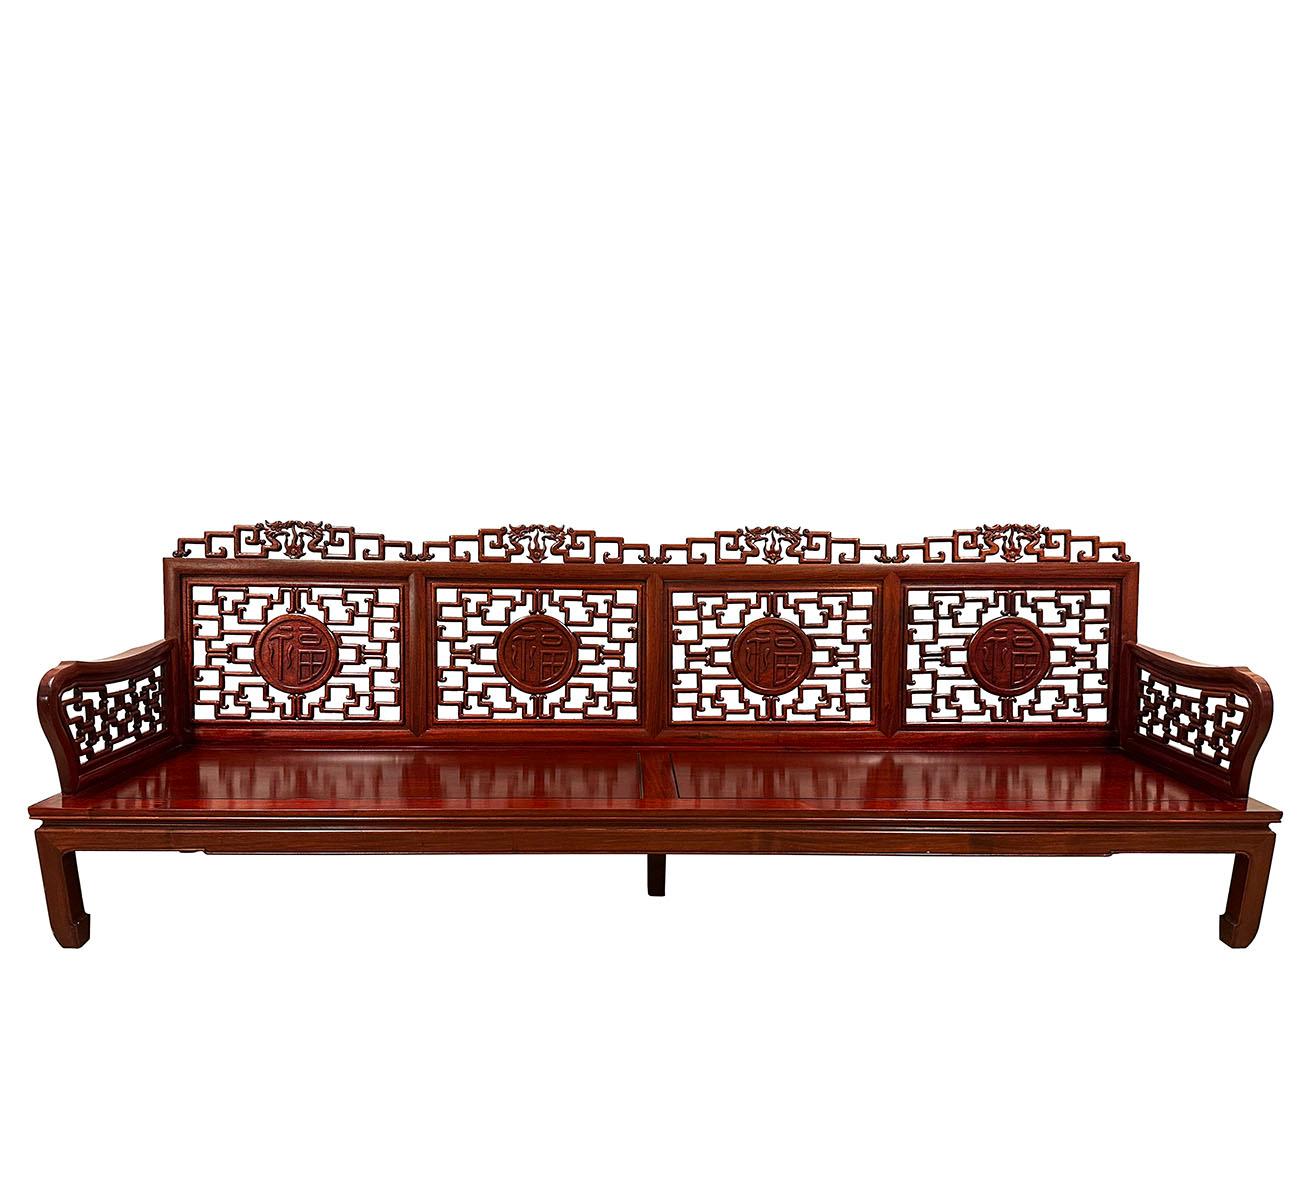 This gorgeous Vintage Chinese Rosewood Carved Long Bench, Sofa has about 70 years history and still has its original condition, very smooth to touch, full of patina. It was hand made and hand carved with solid rosewood. Heavy and sturdy. It features